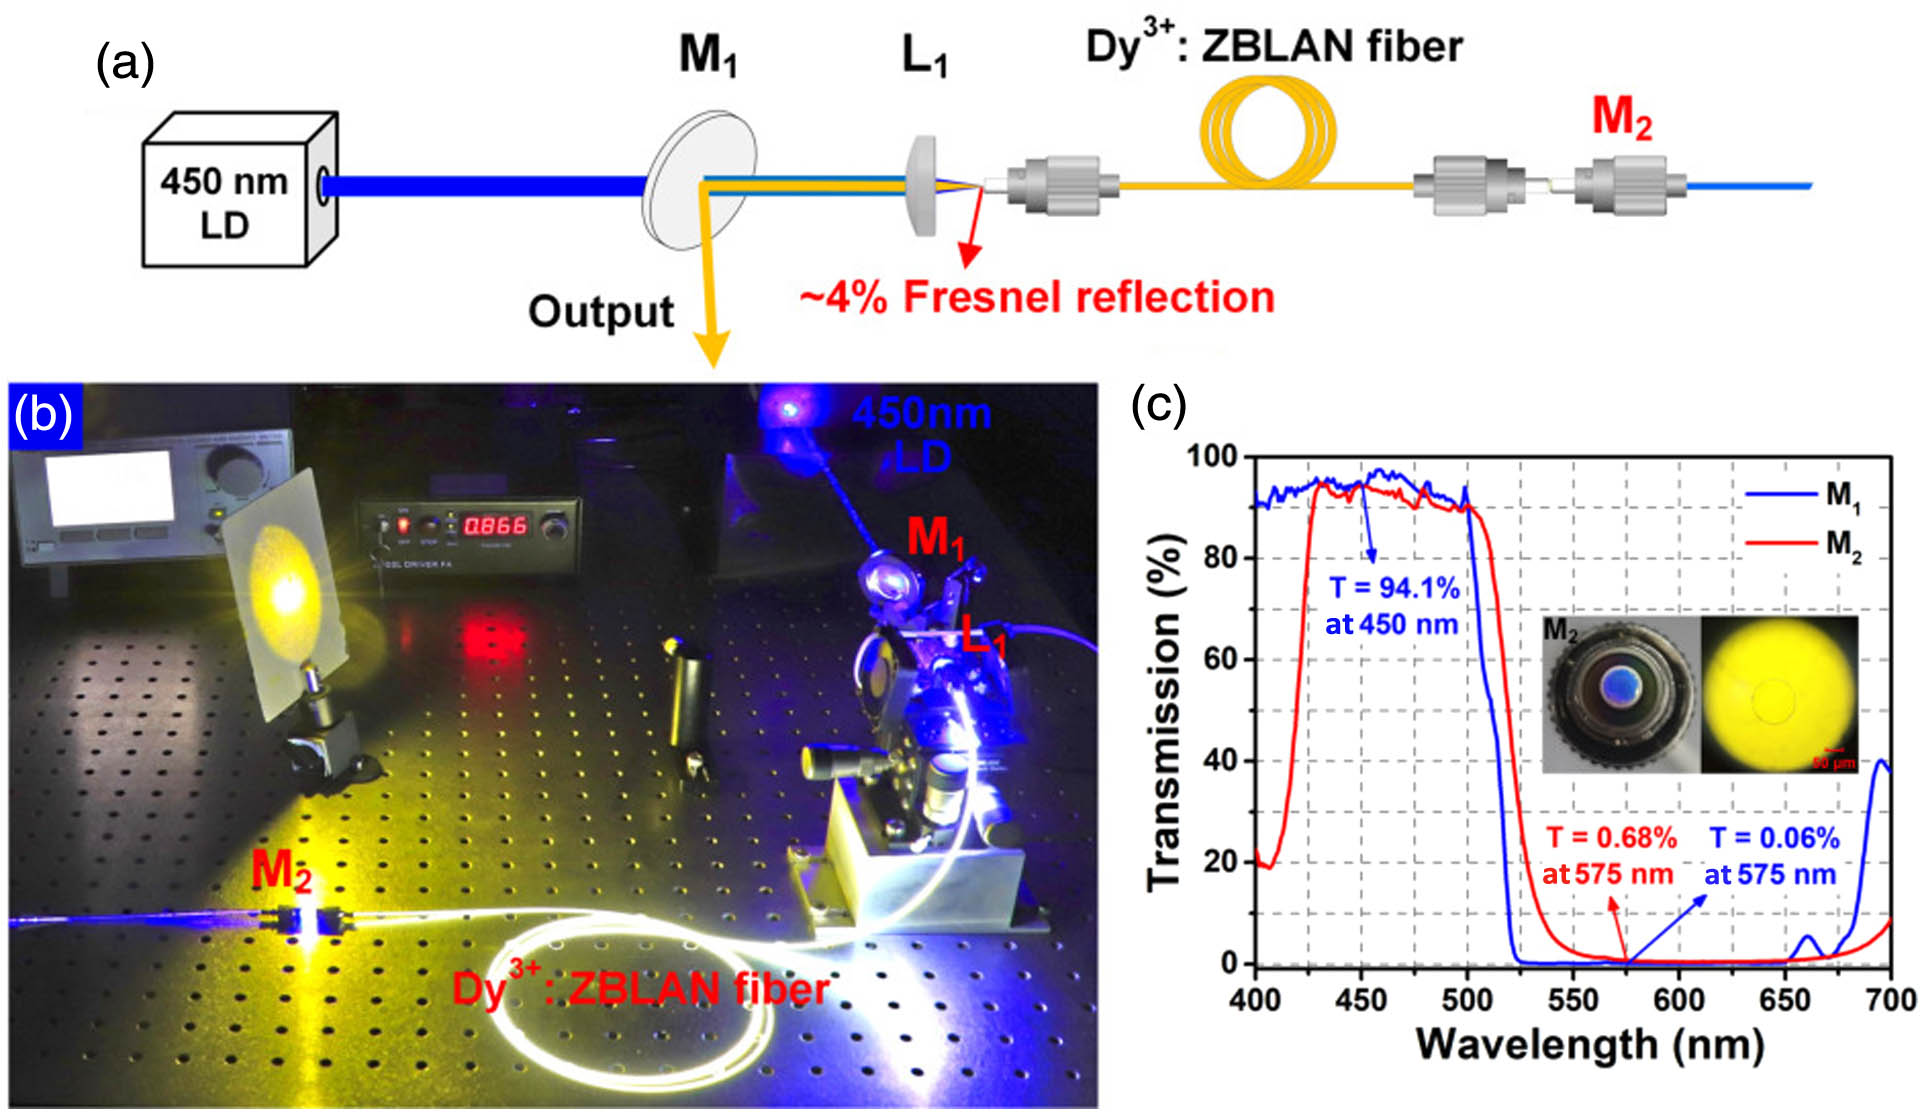 (a) Schematic and (b) photograph of the proposed yellow Dy3+-doped fiber laser; (c) optical transmission spectra of the yellow-reflection mirror (M1) and the fiber end-facet mirror (M2), respectively [insets, photo (left) and microscopic image (right) of the M2].